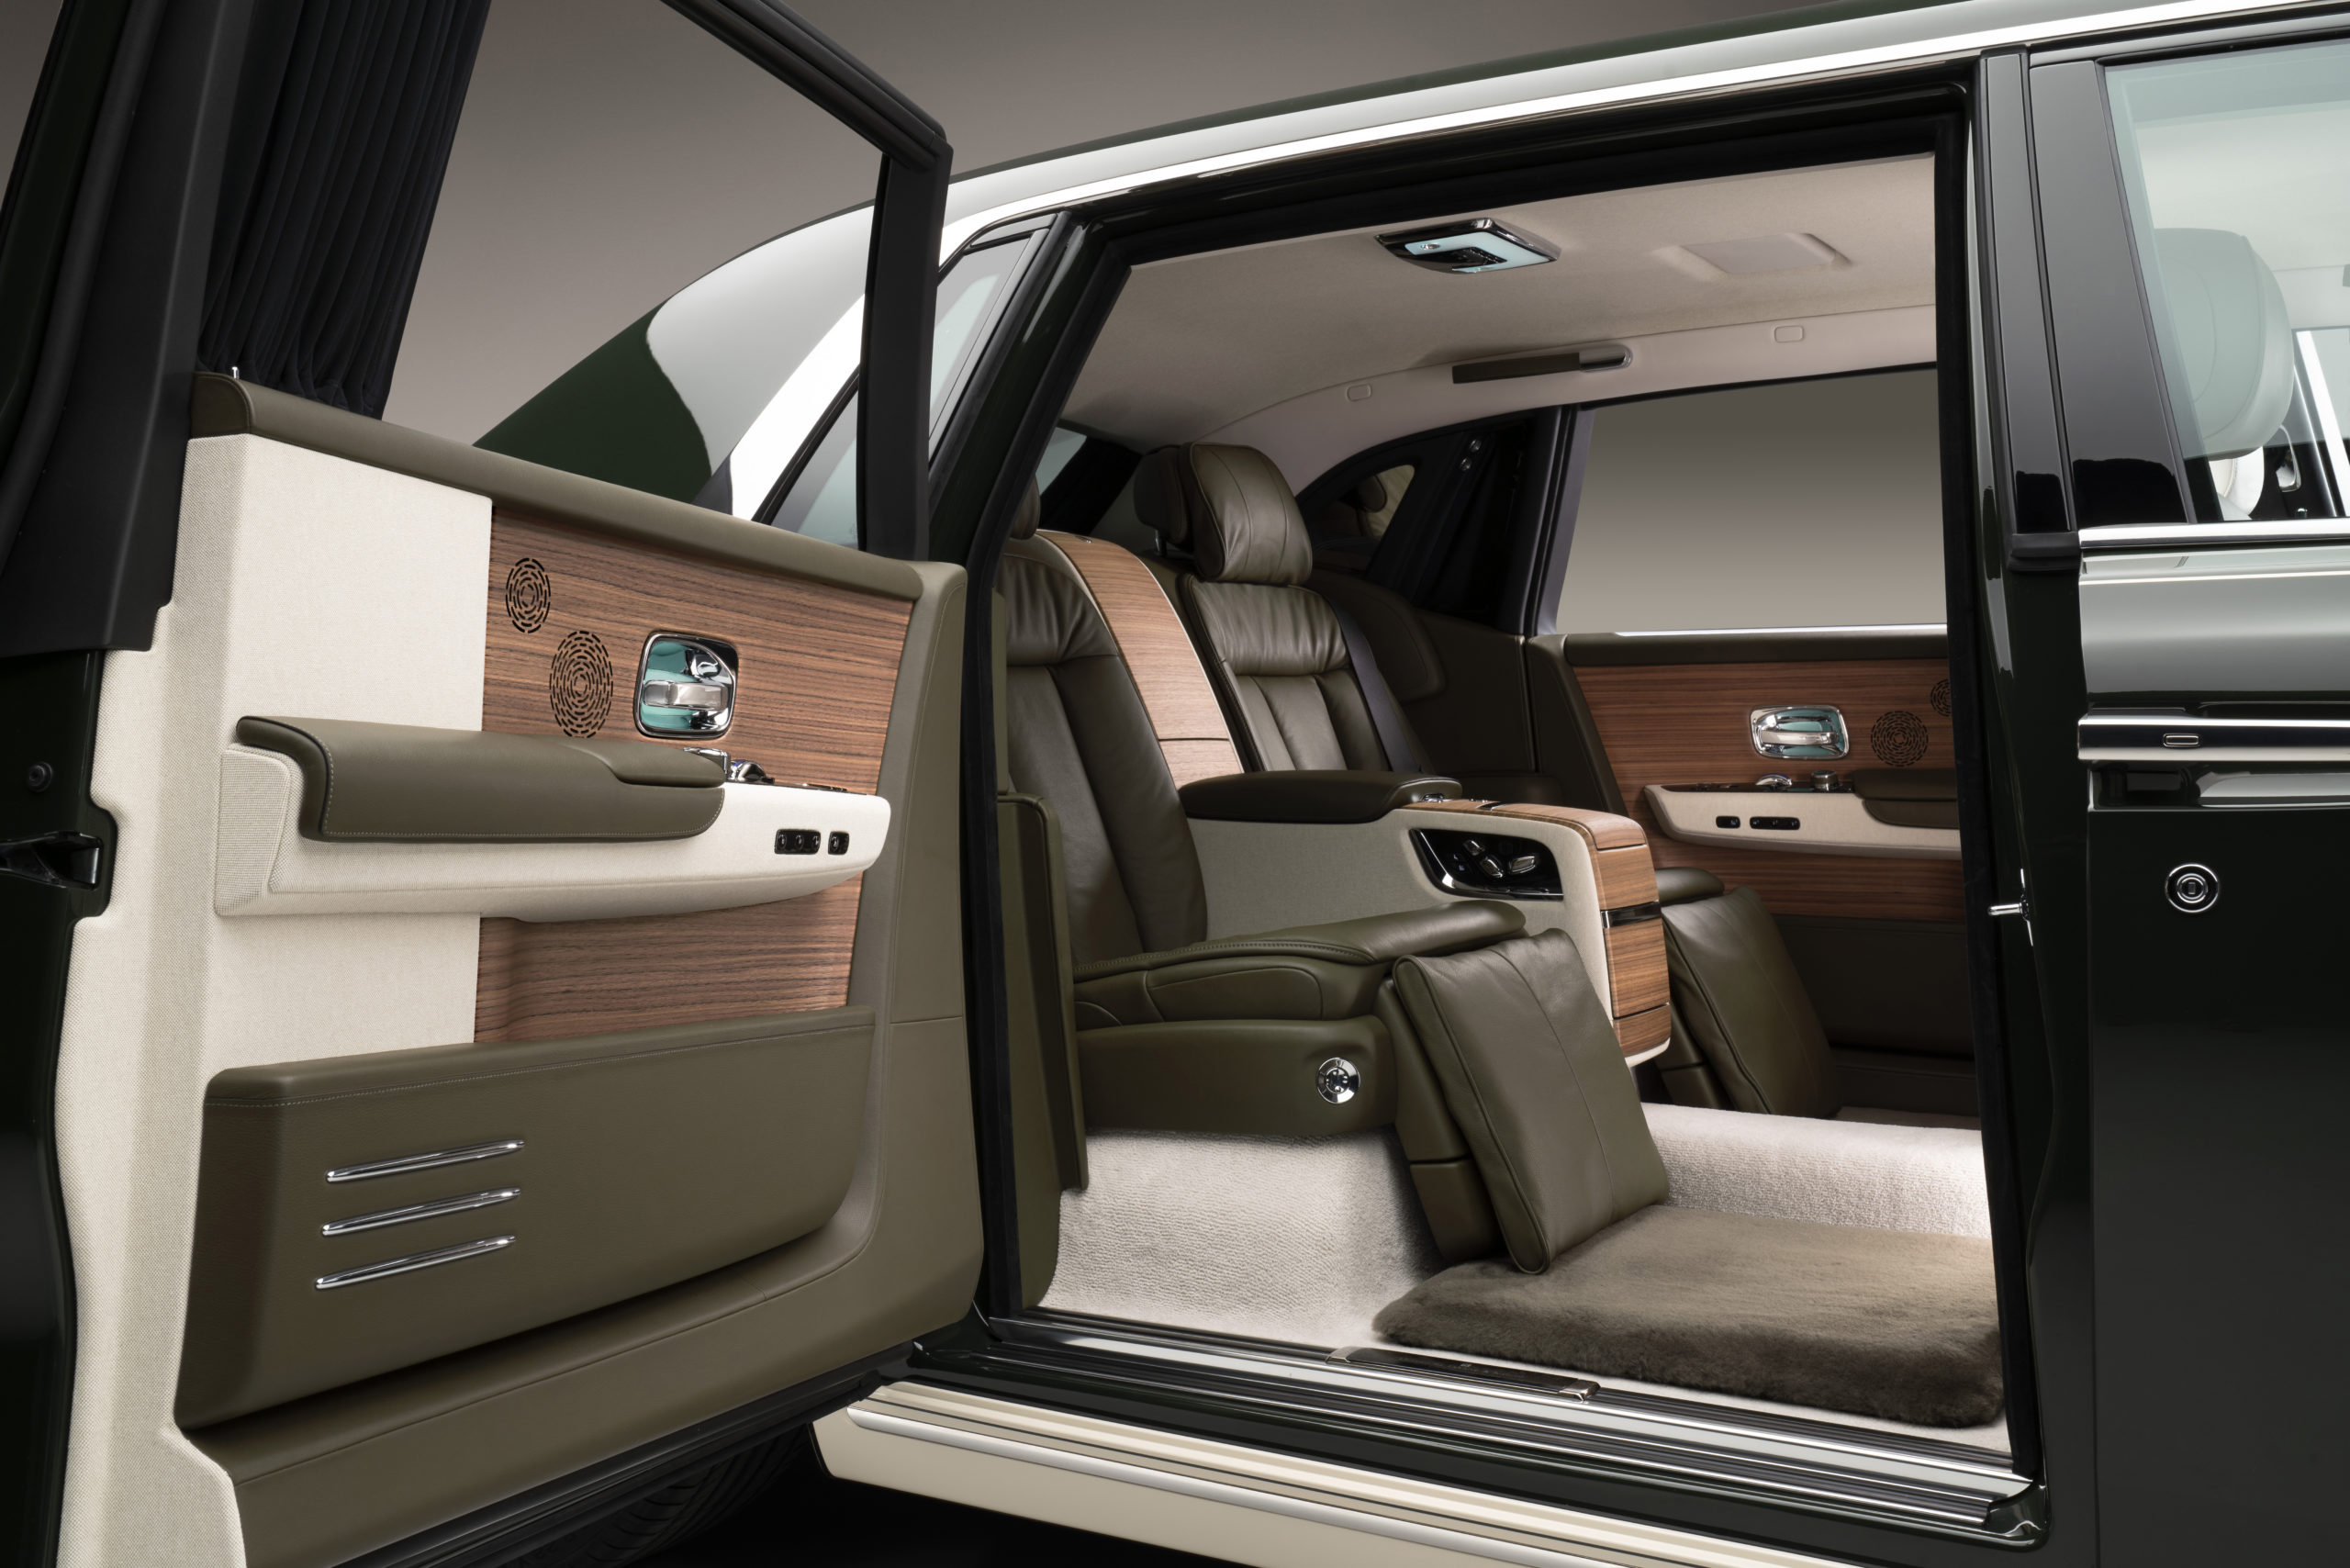 Rolls-Royce Created A One-Off Phantom For A Billionaire Client And Its Beautiful